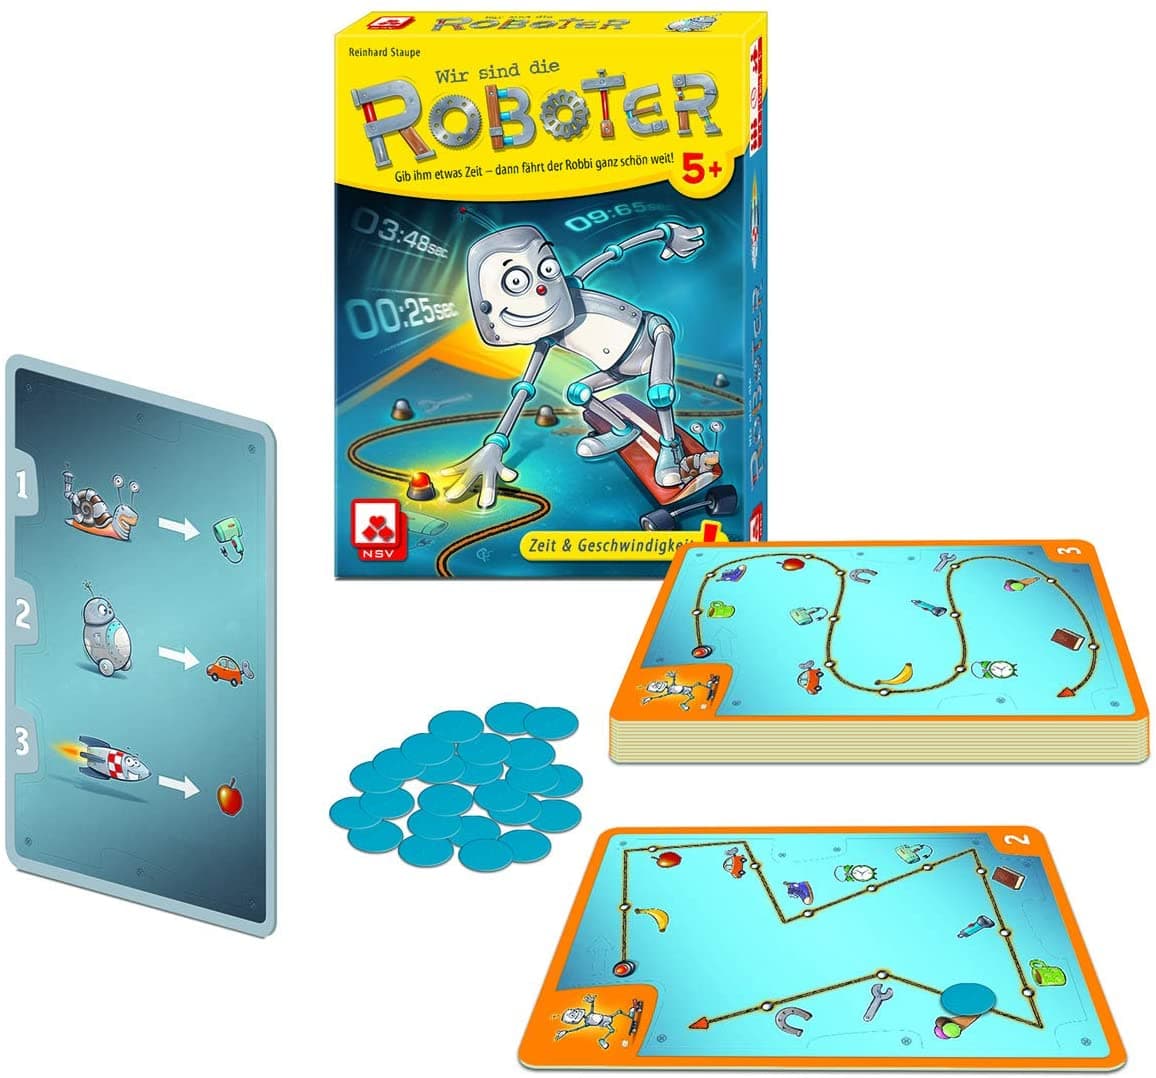 [Spiel2020] Robots by Tric Trac